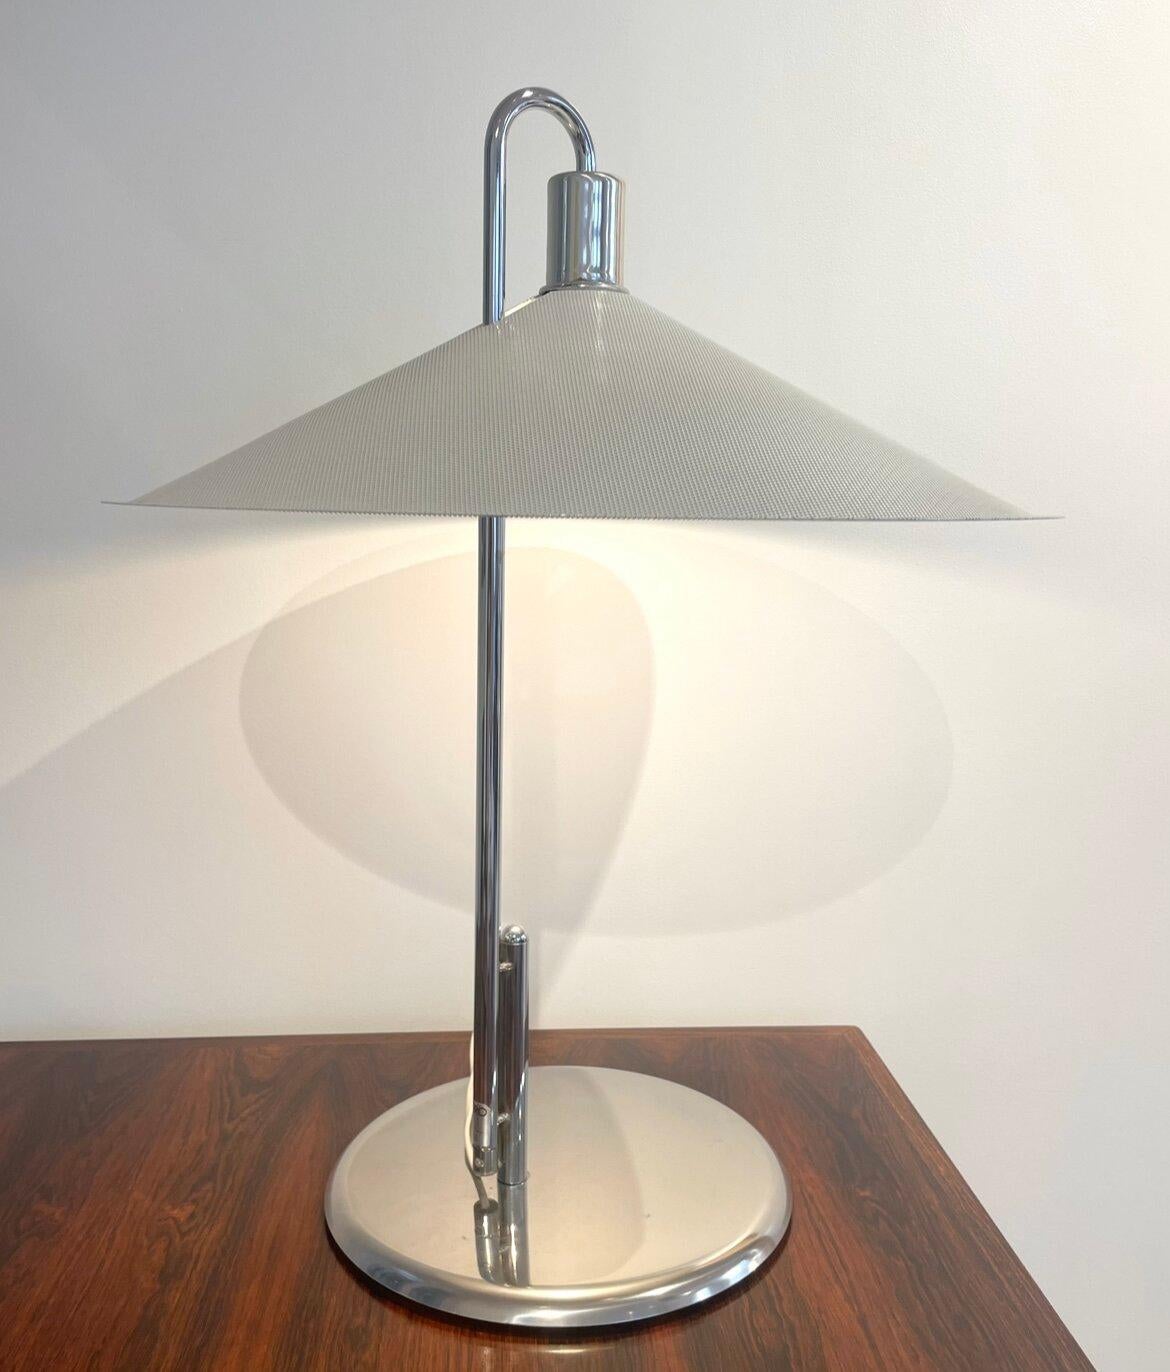 Created by Swedish designers Lindau and Lindekrantz for the publisher Zero in the 70s, this table lamp has a very graphic line that is reinforced by its large lacquered and perforated metal lampshade.